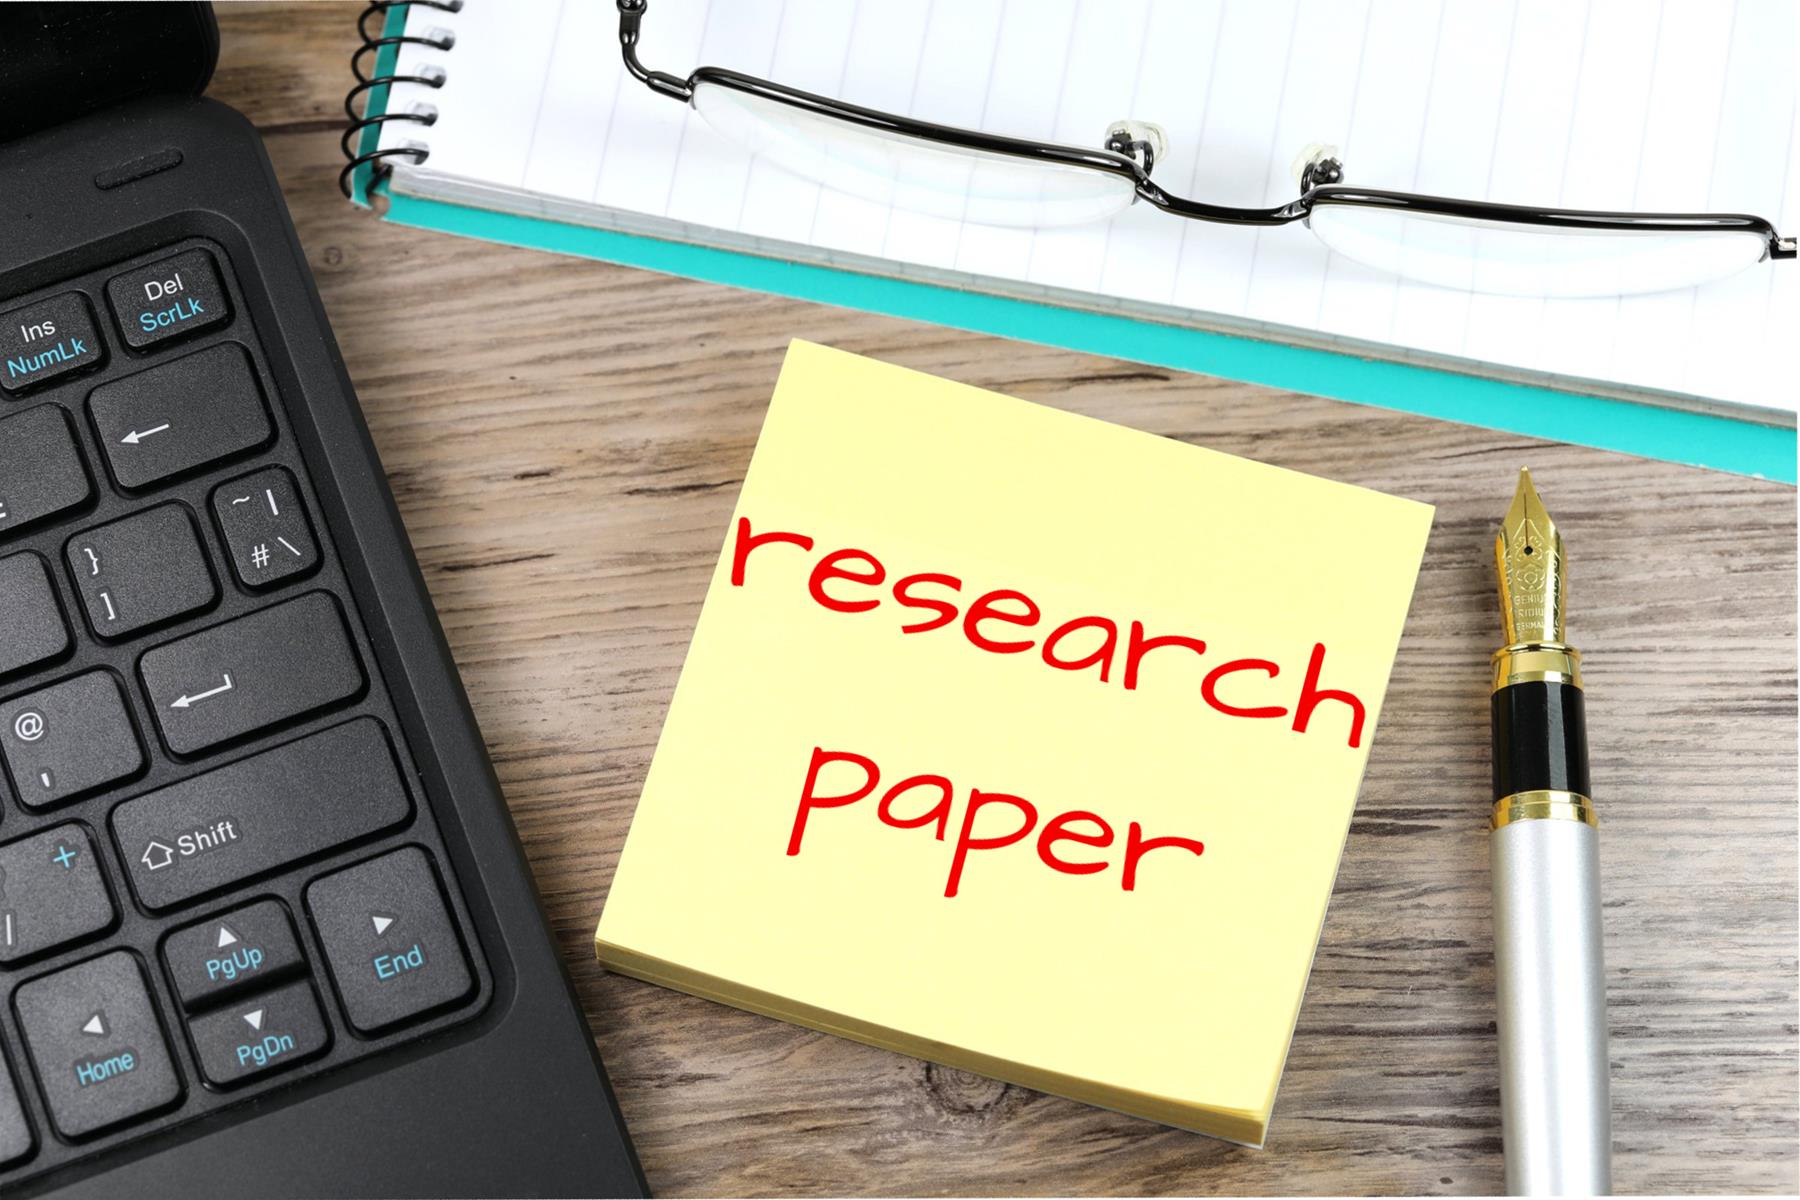 difference between research paper and report